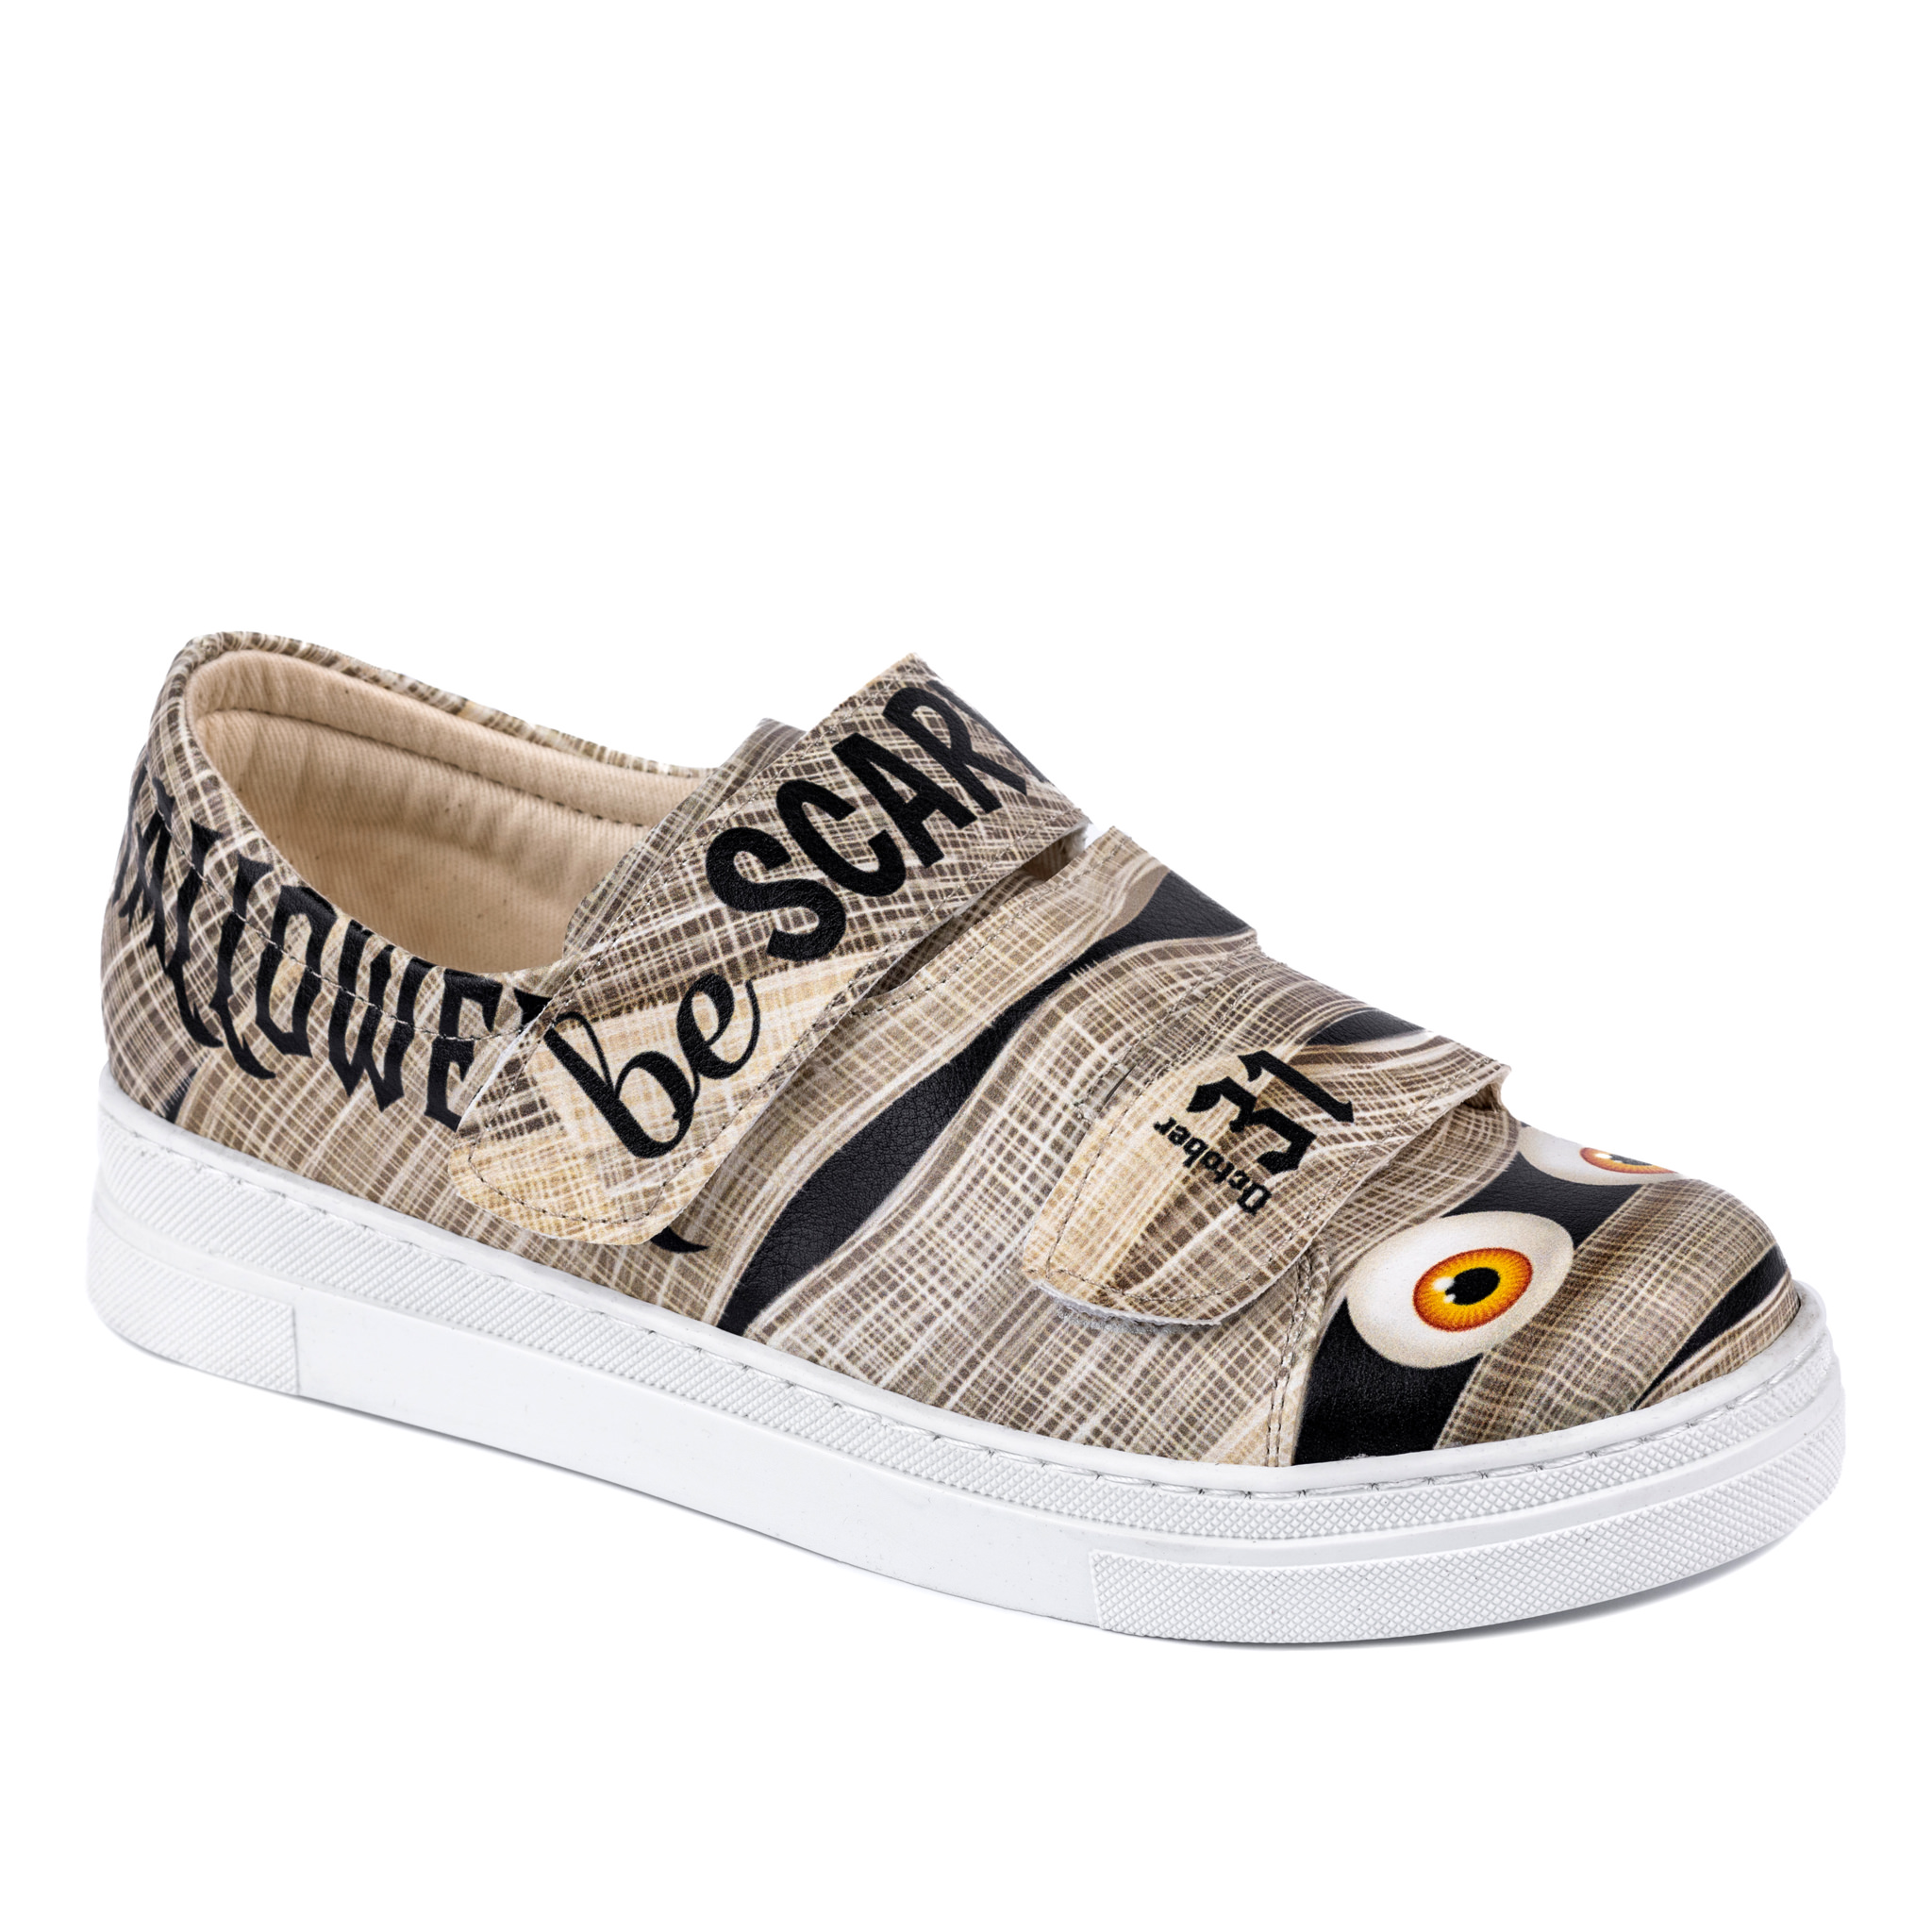 SCARY VECRO BAND SNEAKERS - BEIGE